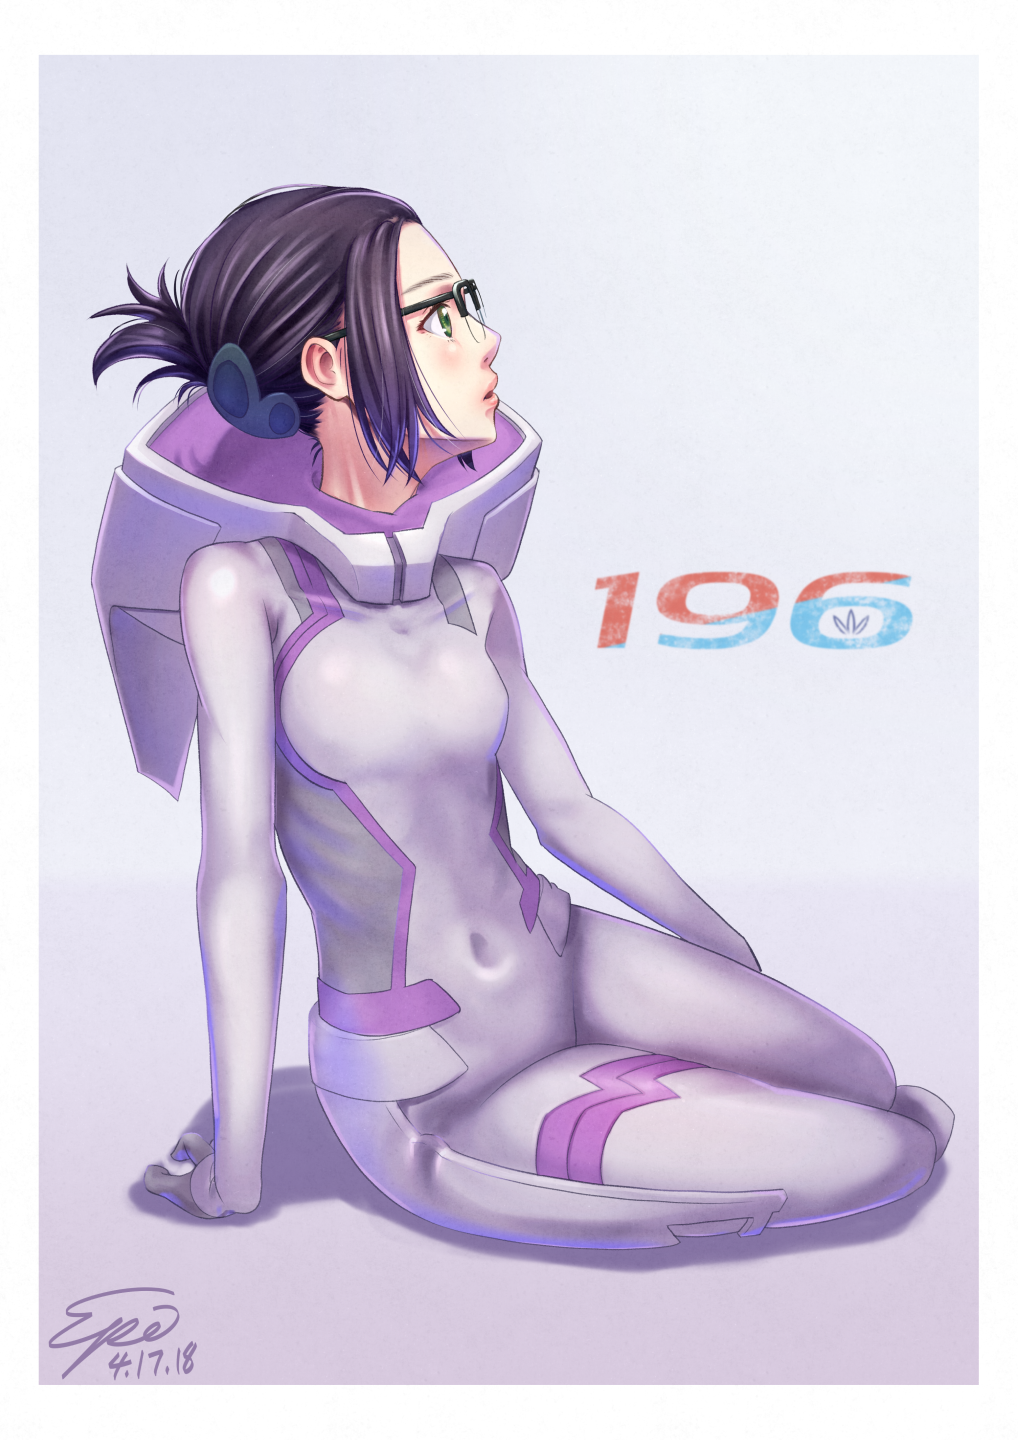 Anime 1018x1440 Darling in the FranXX anime girls Code:196 (Ikuno) plugsuit small boobs bodysuit long hair hair in face meganekko thighs the gap 2D green eyes belly button BellySister tight clothing fan art anime purple hair women with glasses open mouth looking up blushing portrait display